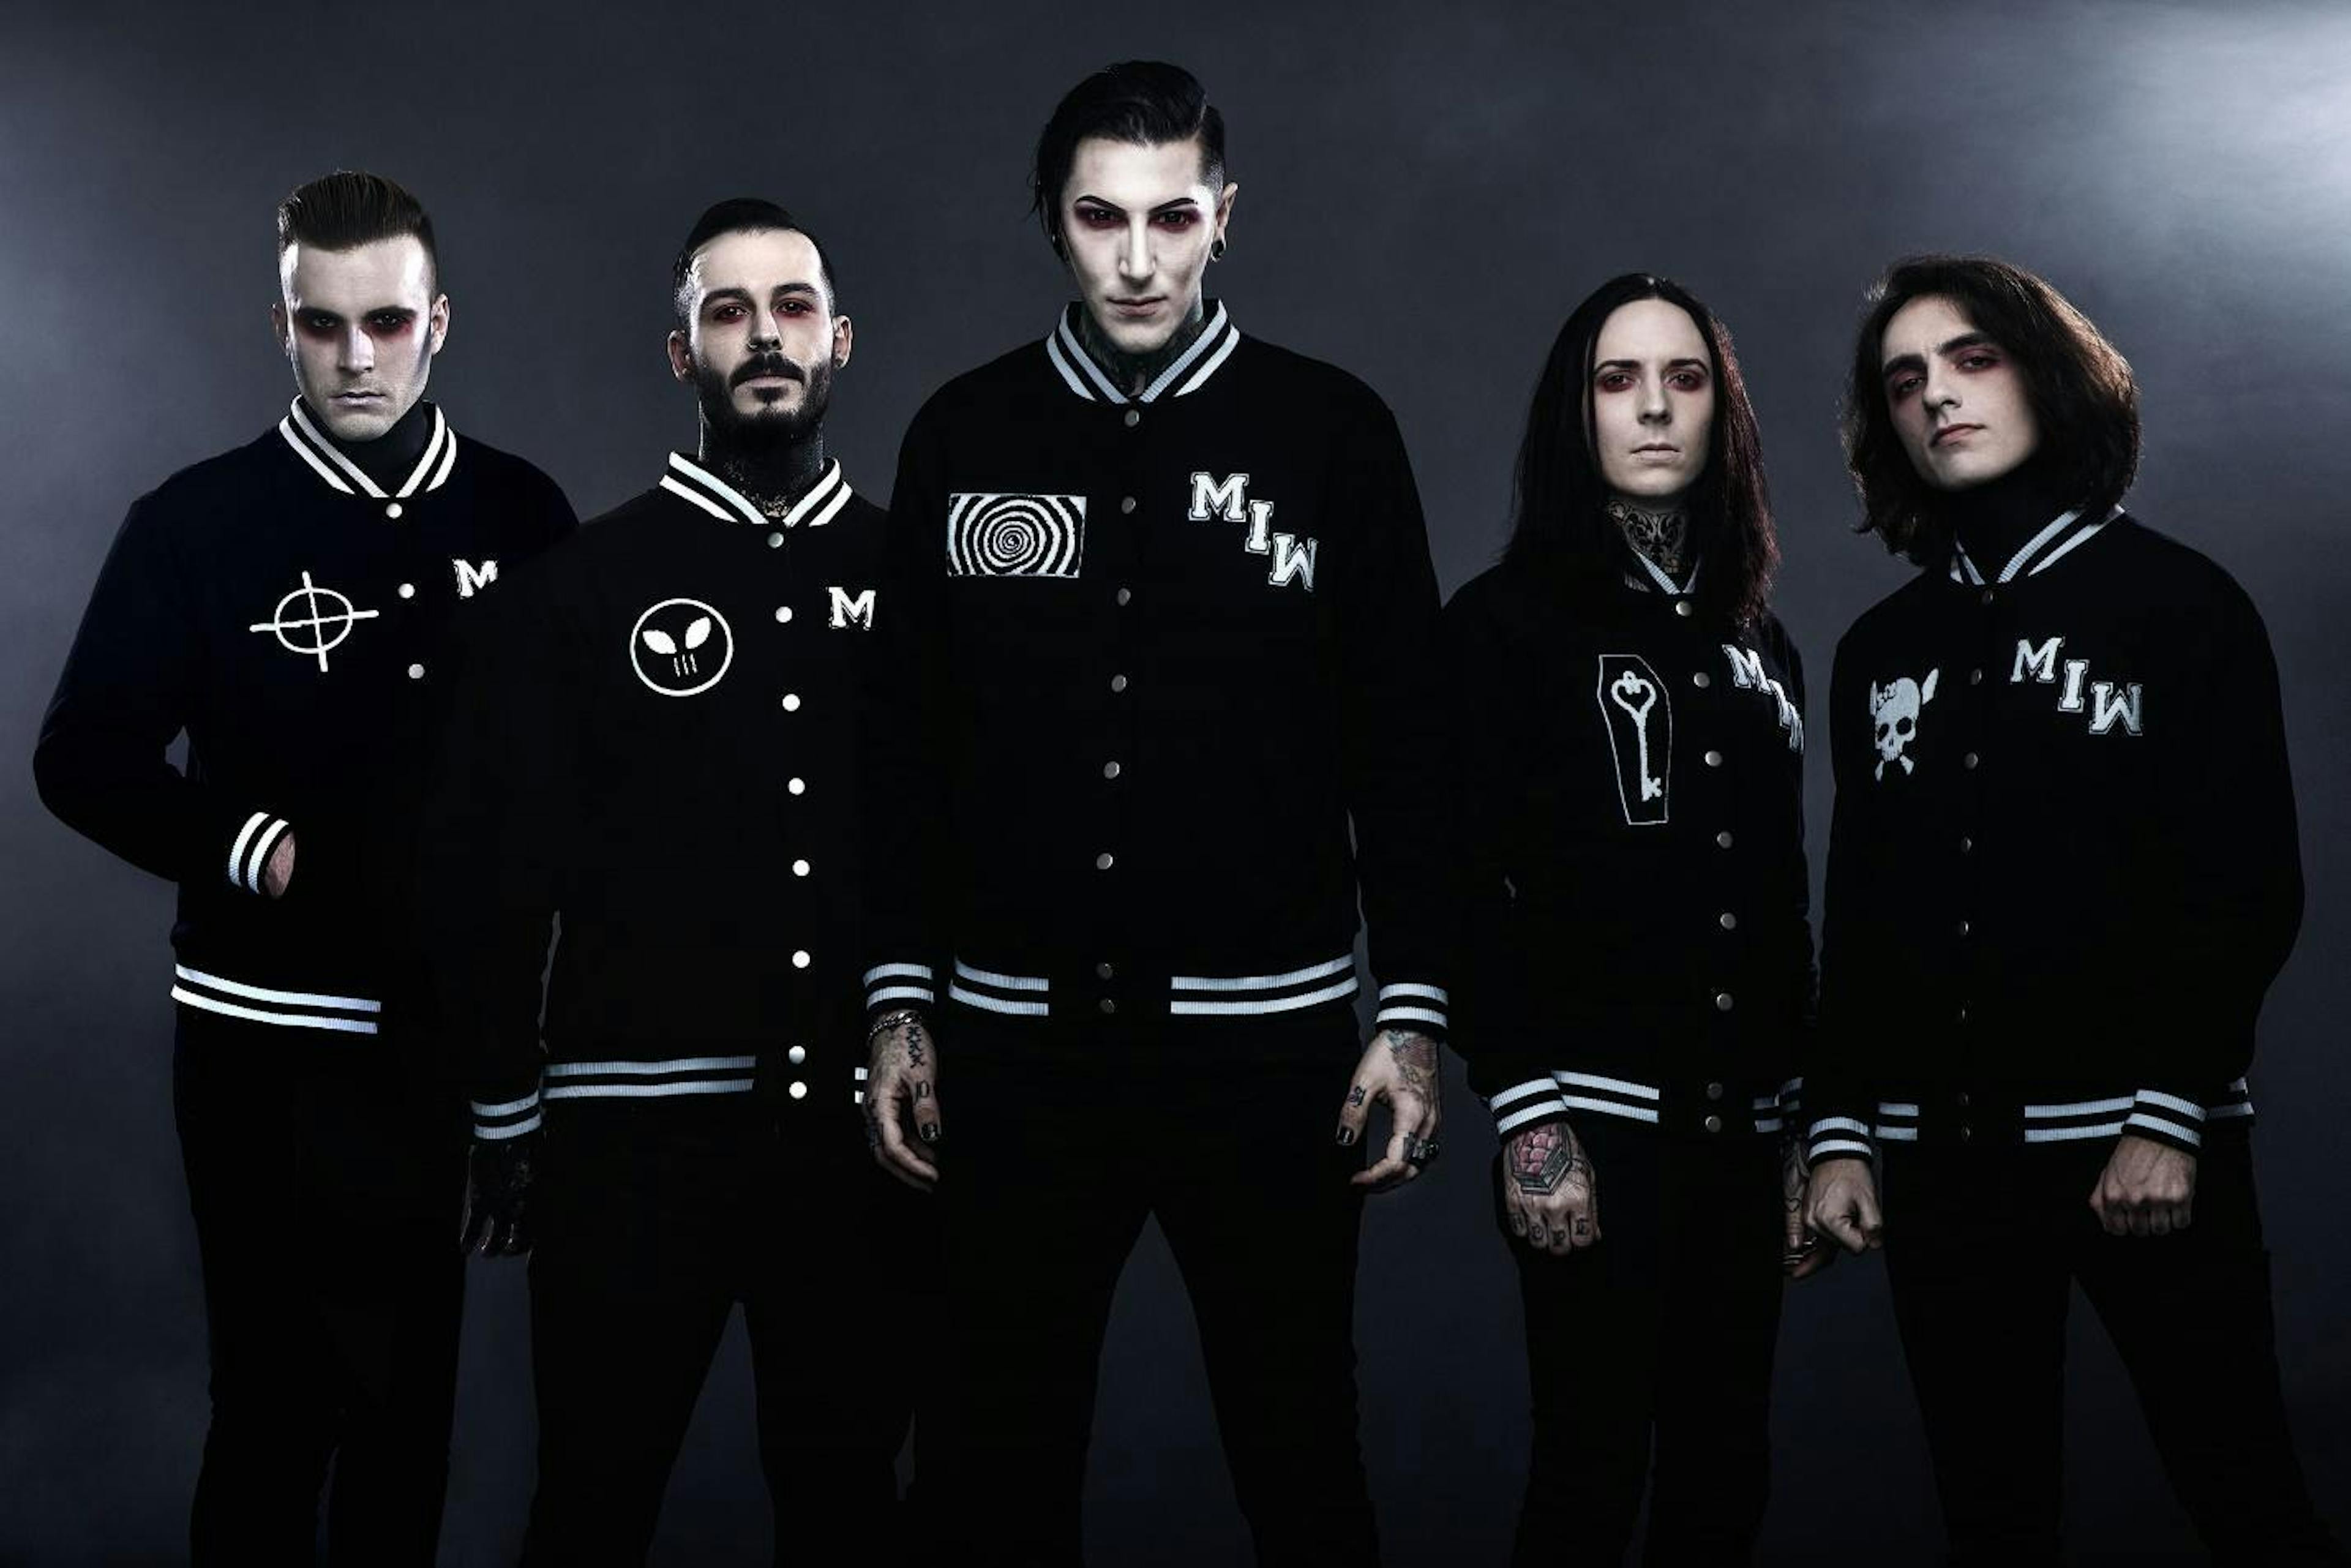 Chris Motionless: "It Sucks To Feel Like I’m Losing Myself In This Alternate Person I Feel Like I Have To Be"